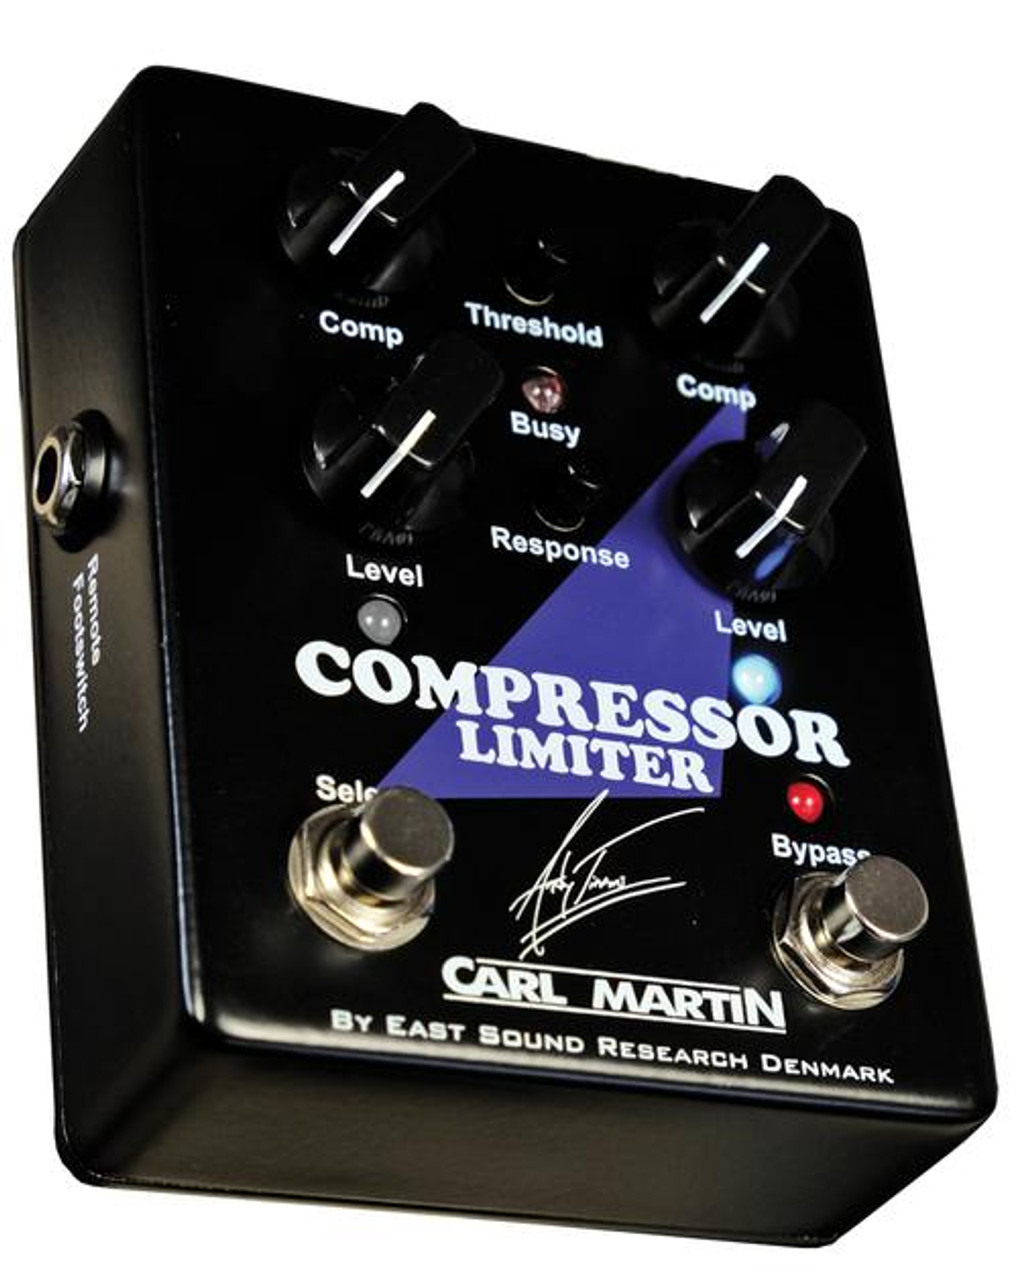 Carl Martin Andy Timmons Signature Compressor Limiter Pedal